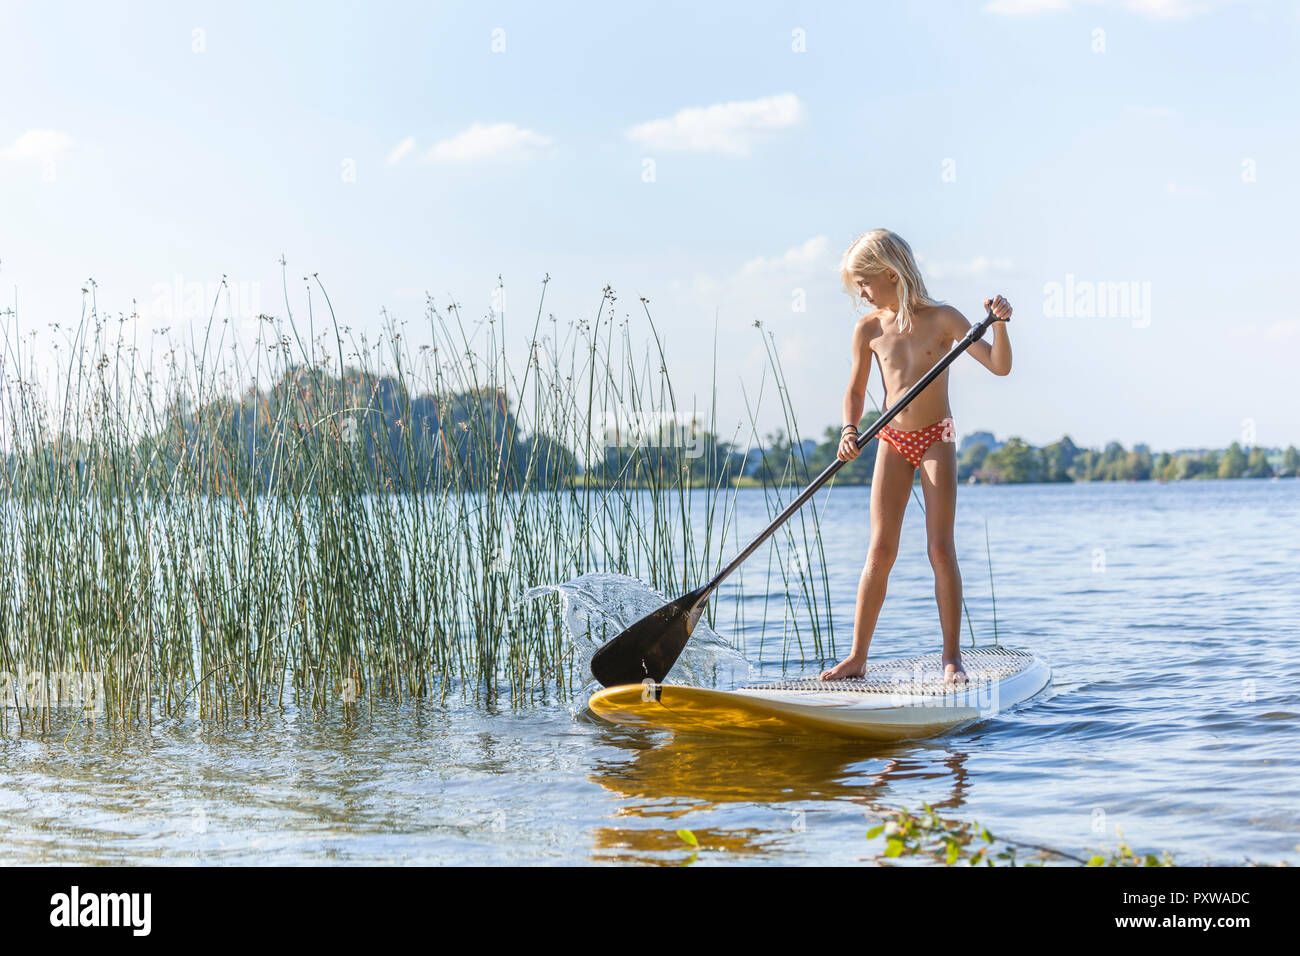 Young girl stand up paddle surfing Stock Photo